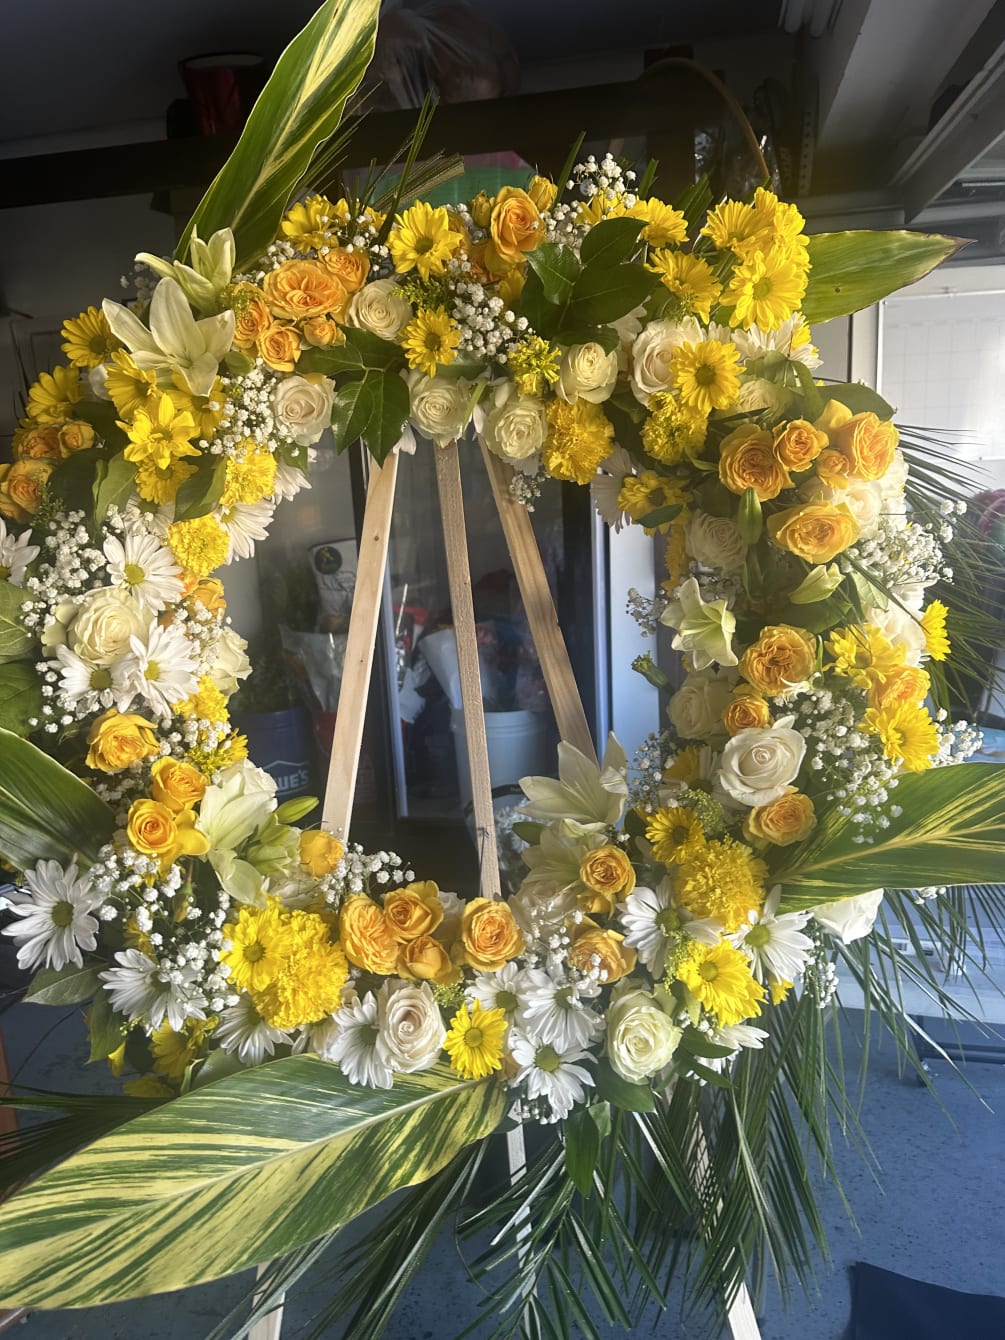 This beautiful wreath is designed with yellow and white roses , yellow